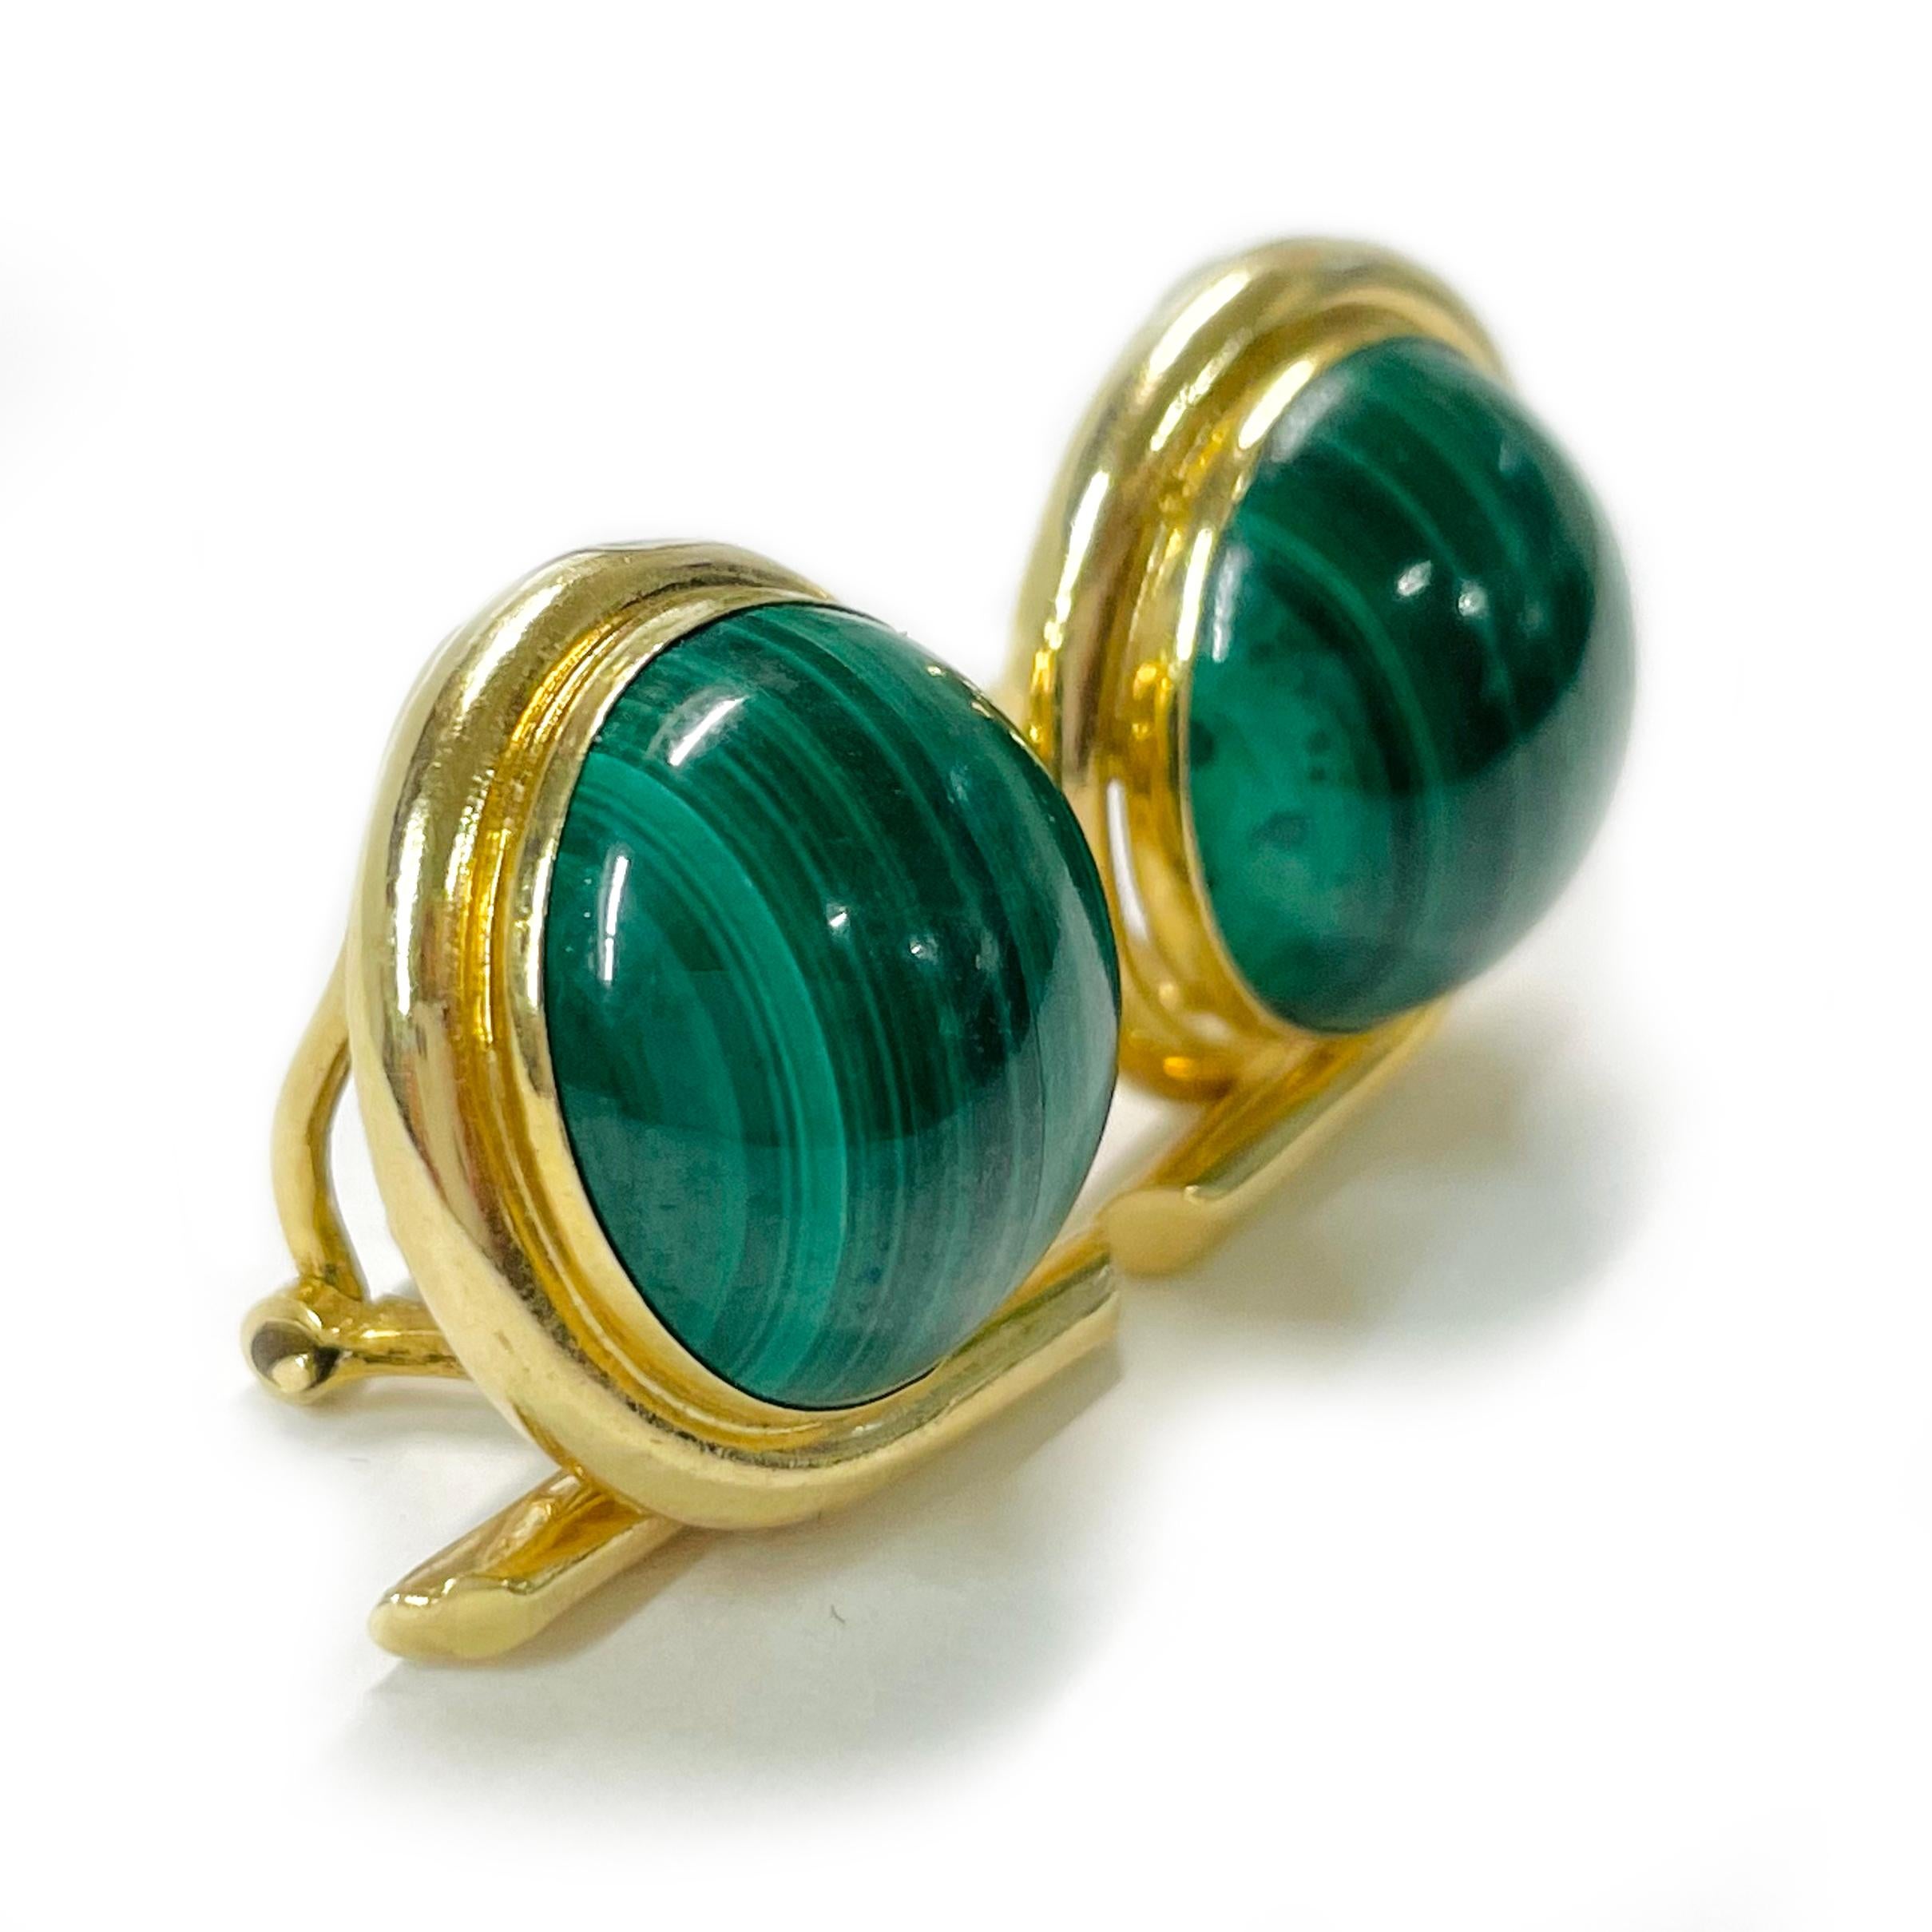 Yellow Gold Malachite Clip-On Earrings. The earrings feature a round Malachite cabochon set in a round 14 karat gold bezel with a bypass design. Stamped on the back of the bezel is PBD 14KT. The clip back is 18 karat yellow gold, stamped on the back